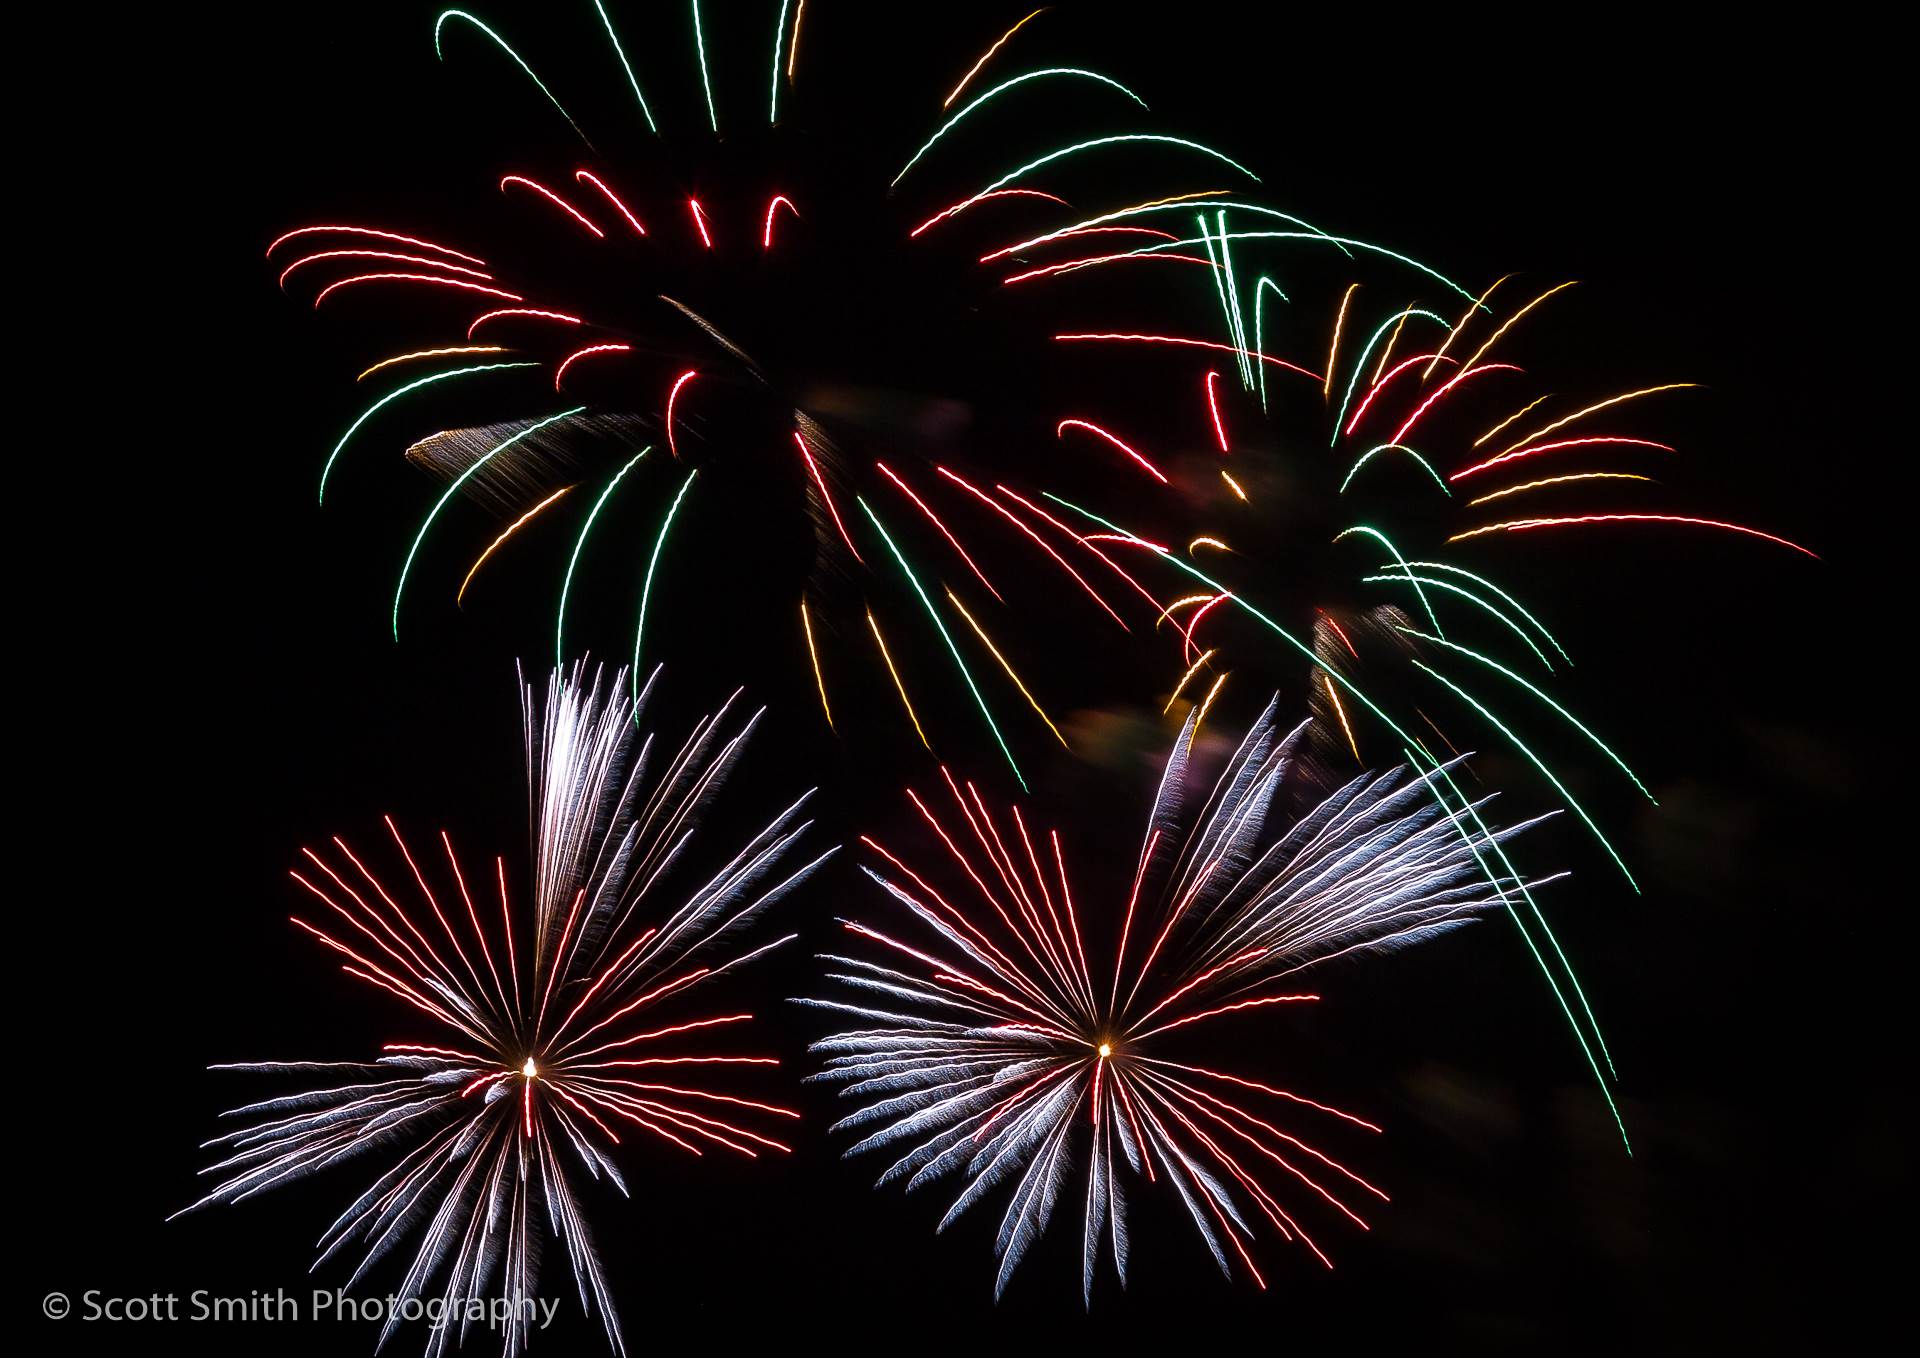 Fireworks in Denver - The long, sparse trails create interesting patterns in the sky. by Scott Smith Photos